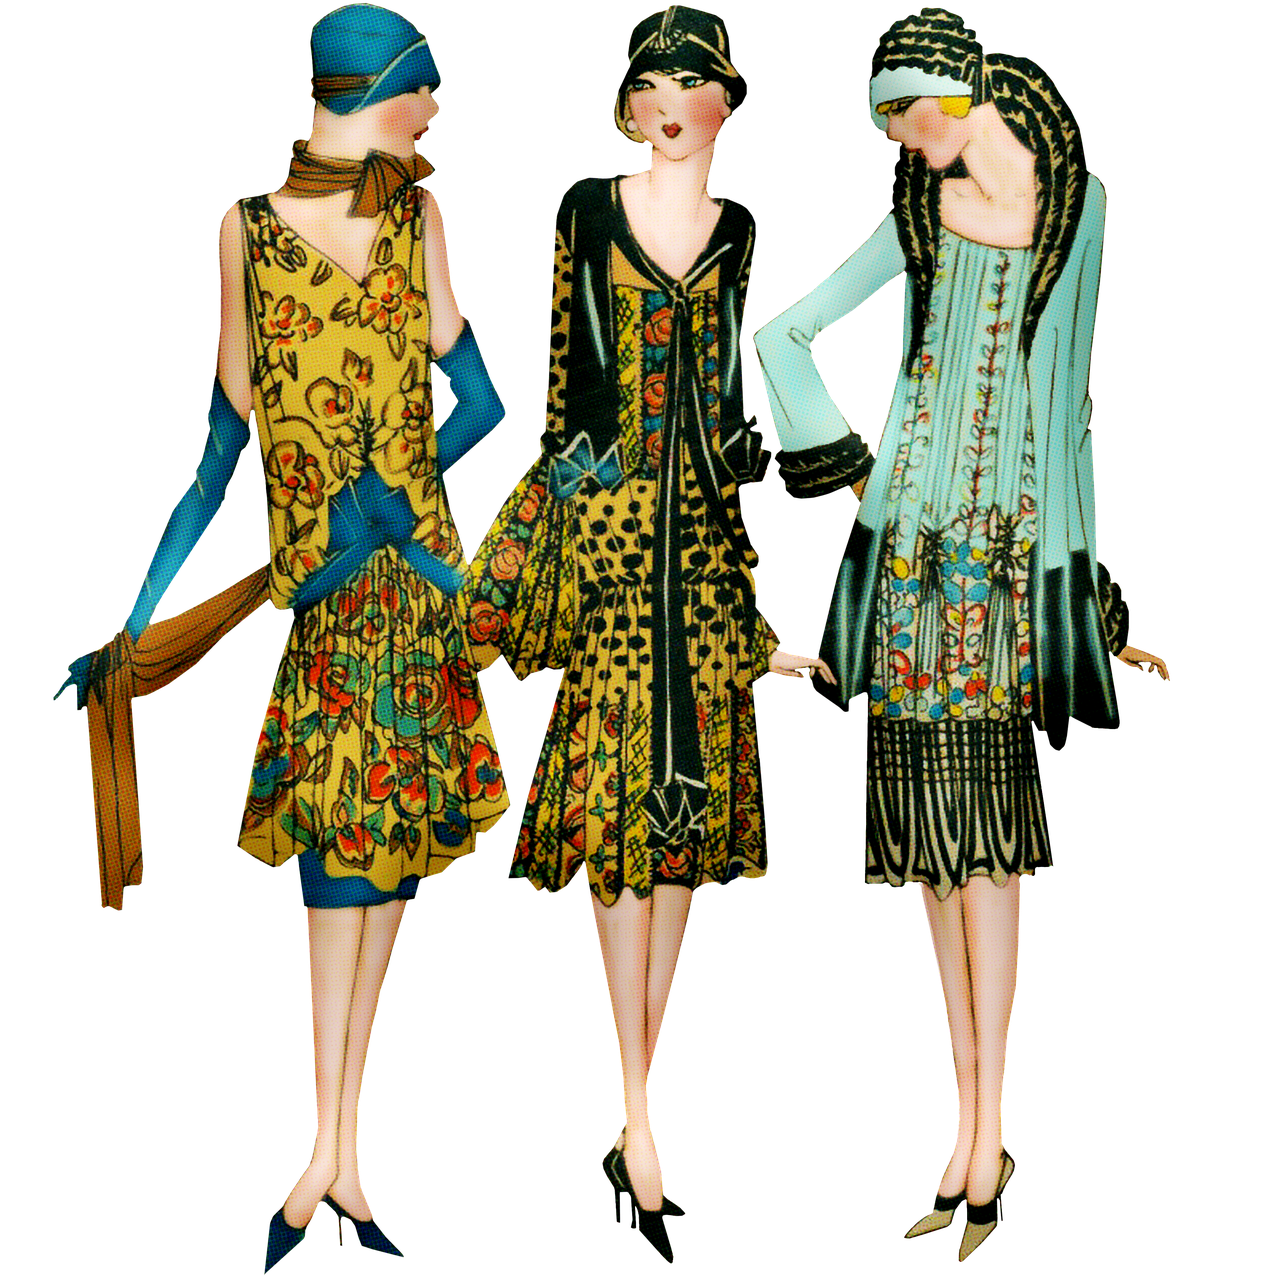 a group of three women standing next to each other, by Brenda Chamberlain, flickr, art nouveau, 1 9 2 0 s cloth style, colorful fashion, wearing a dress made of beads, joseph todorovitch ”